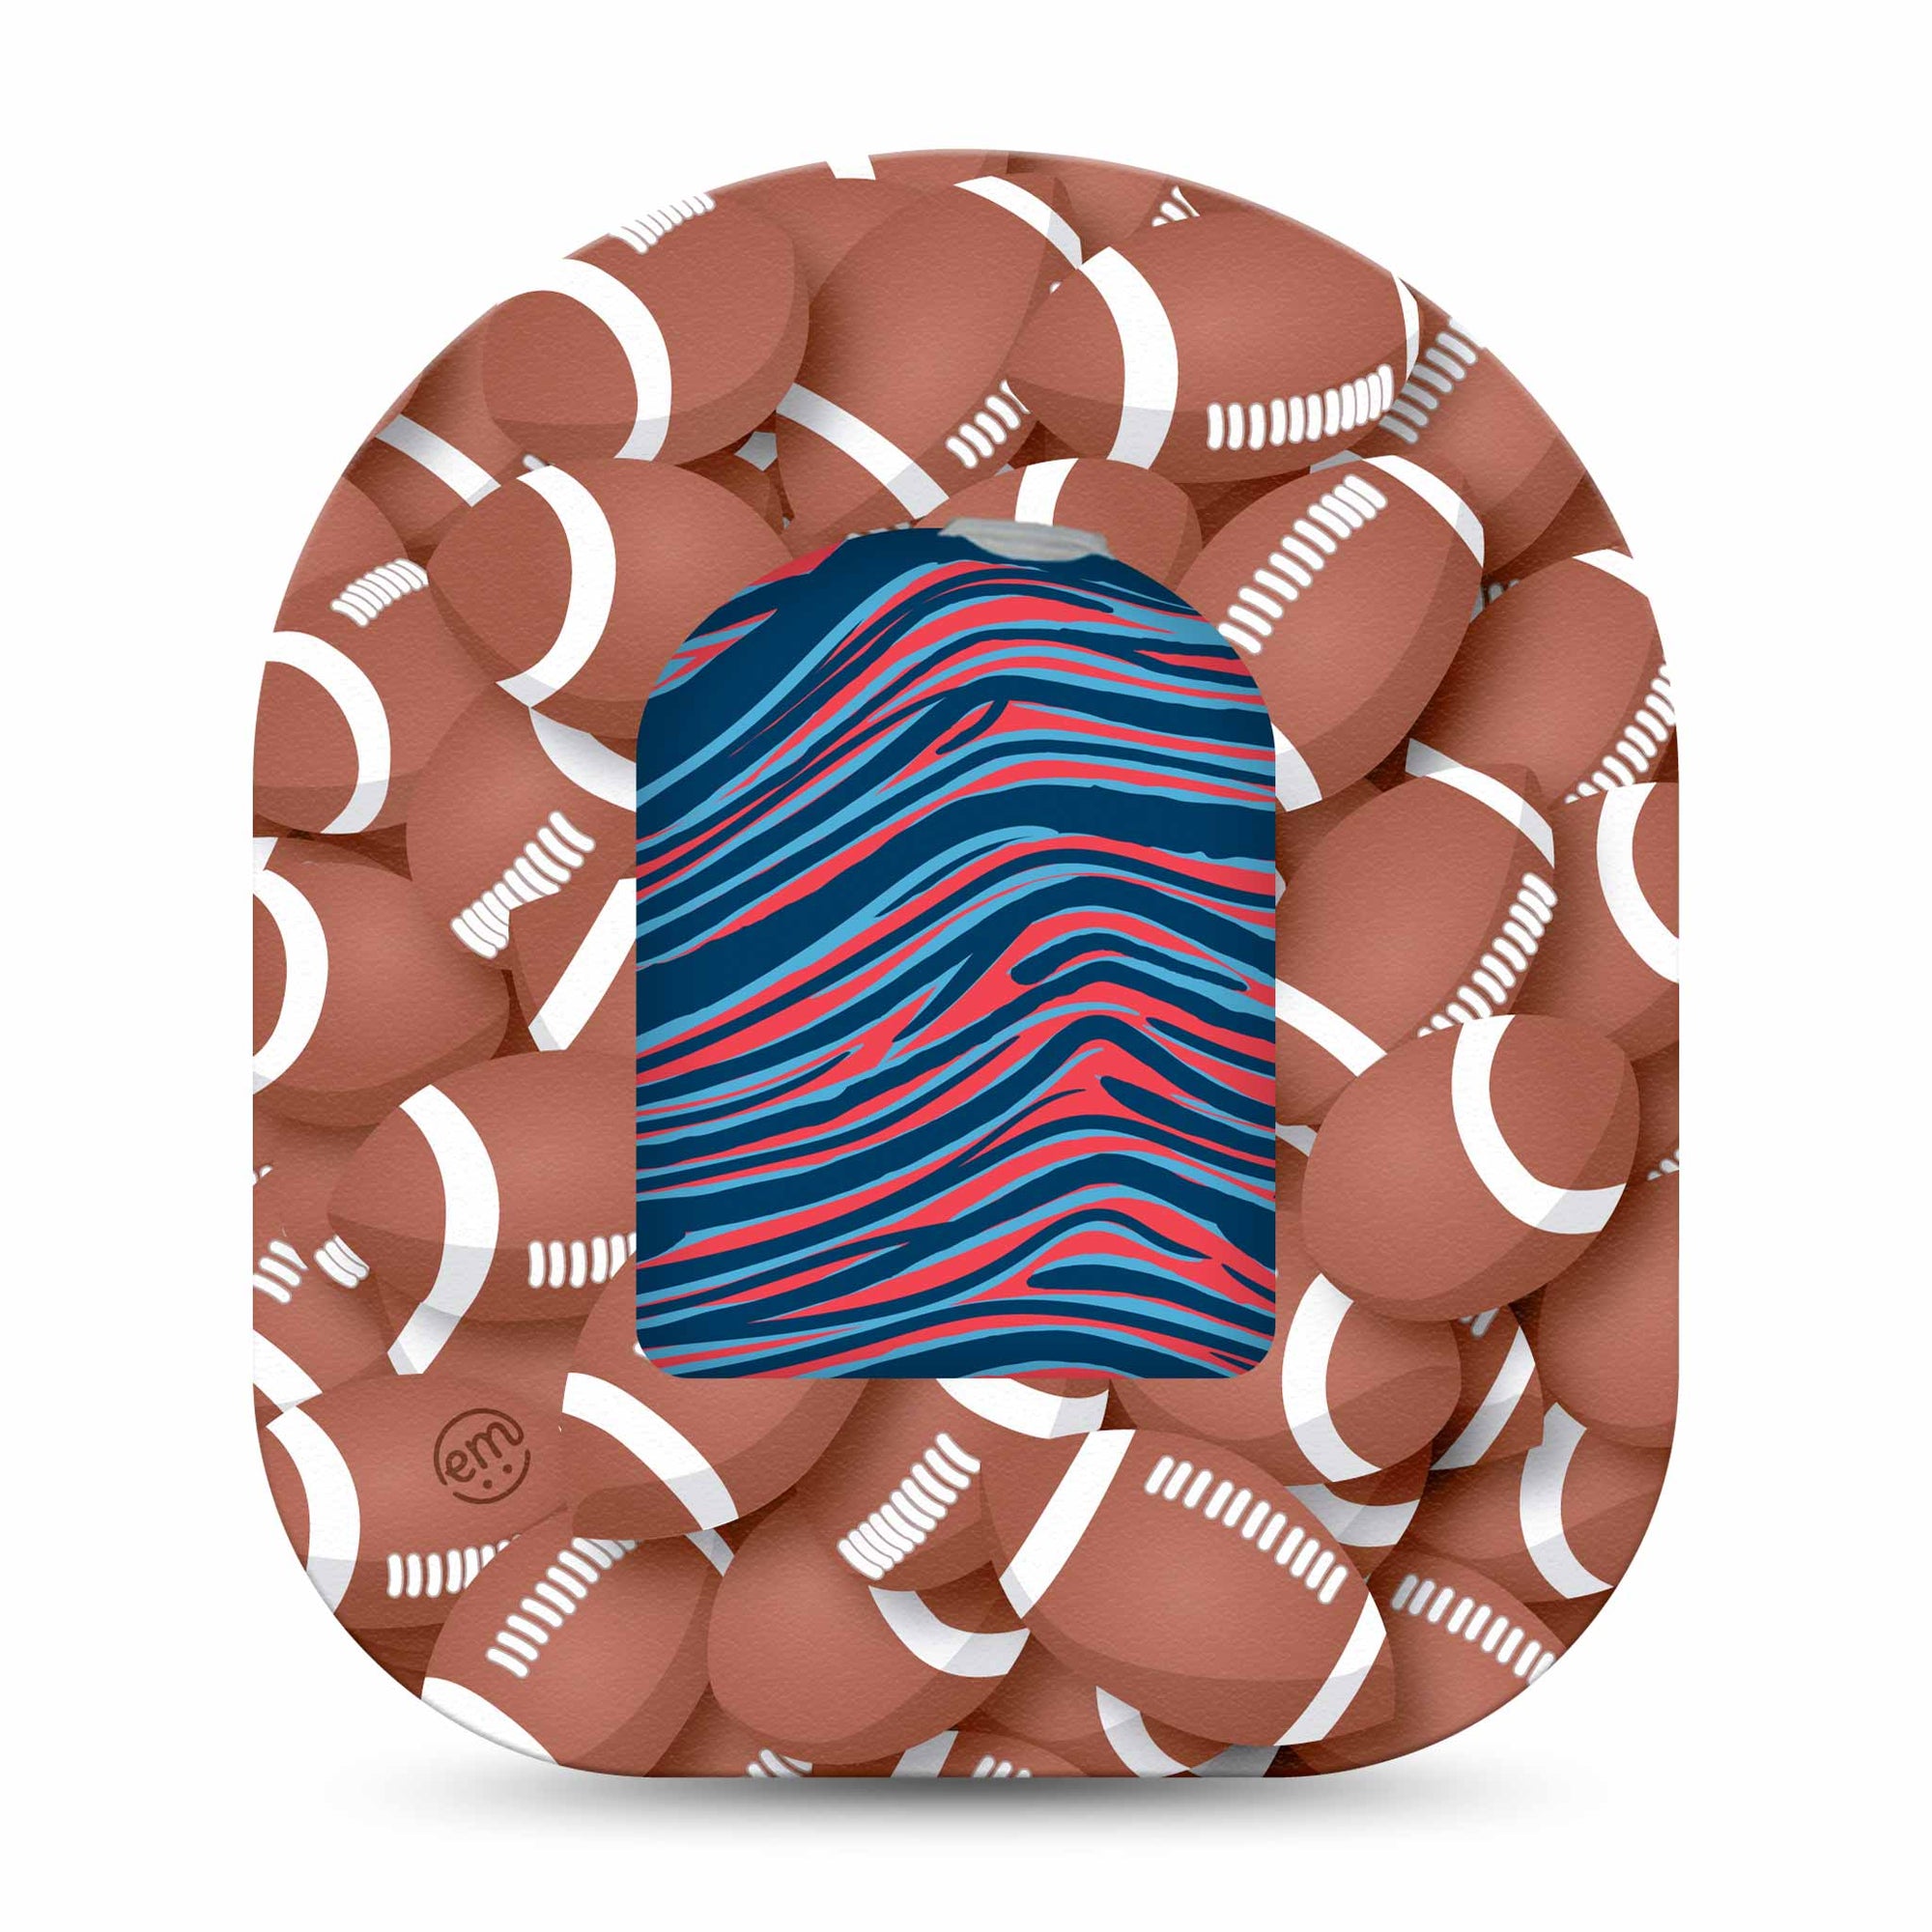 ExpressionMed Navy Blue, Red, and Light Blue Titans Team Spirit Omnipod Pump Sticker and Football Cover